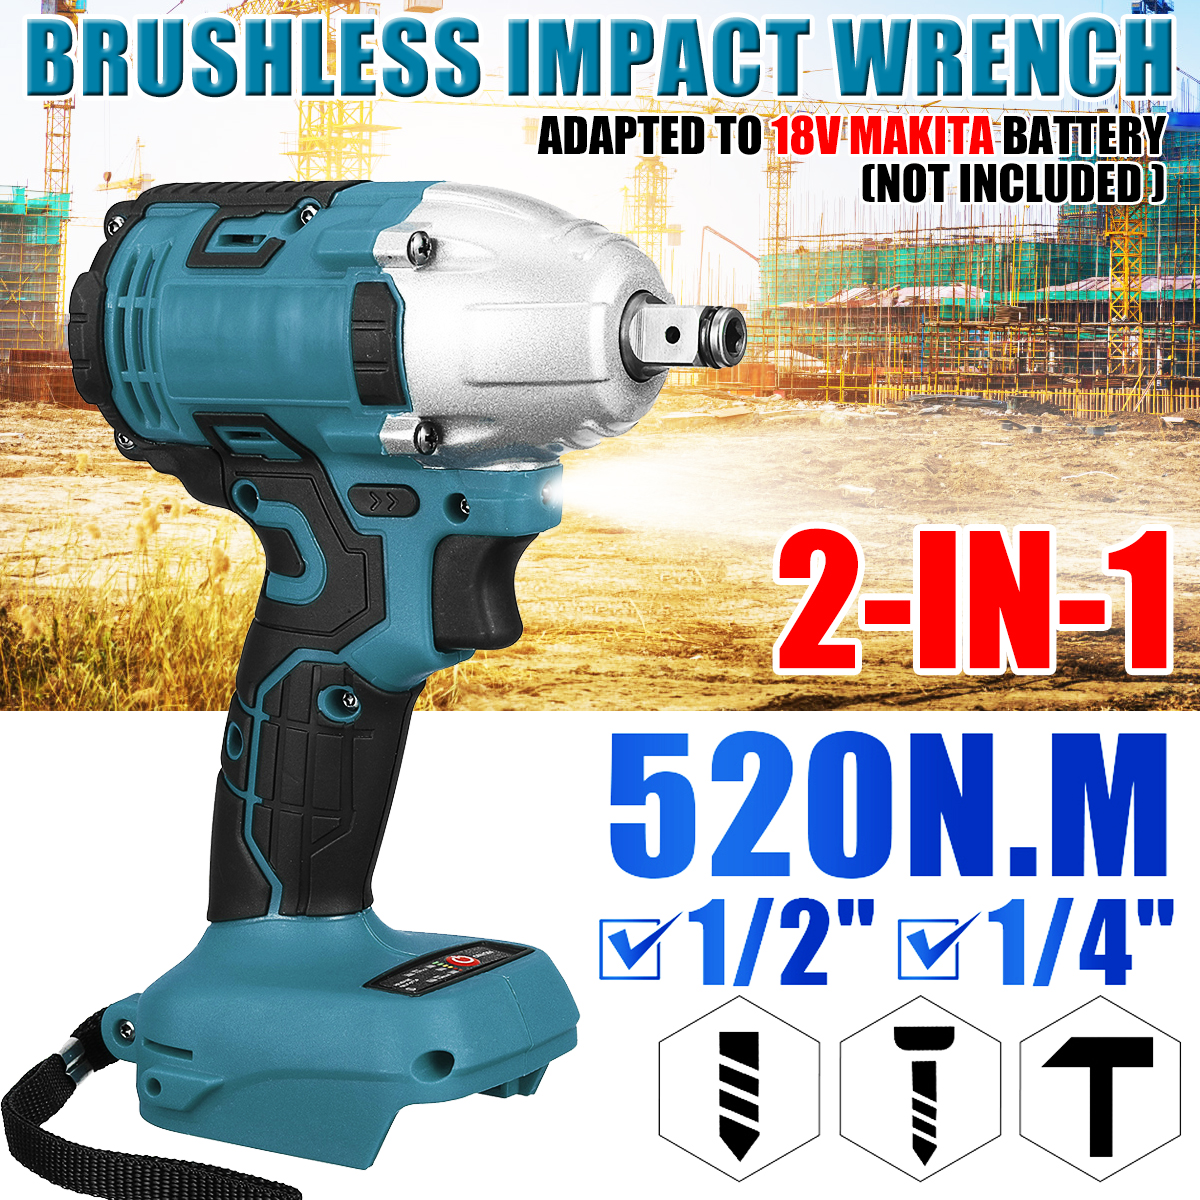 2-in1-520Nm-Li-Ion-Brushless-Cordless-Electric-12quot-Wrench-14quotScrewdriver-Drill-for-Makita-18V--1868317-1